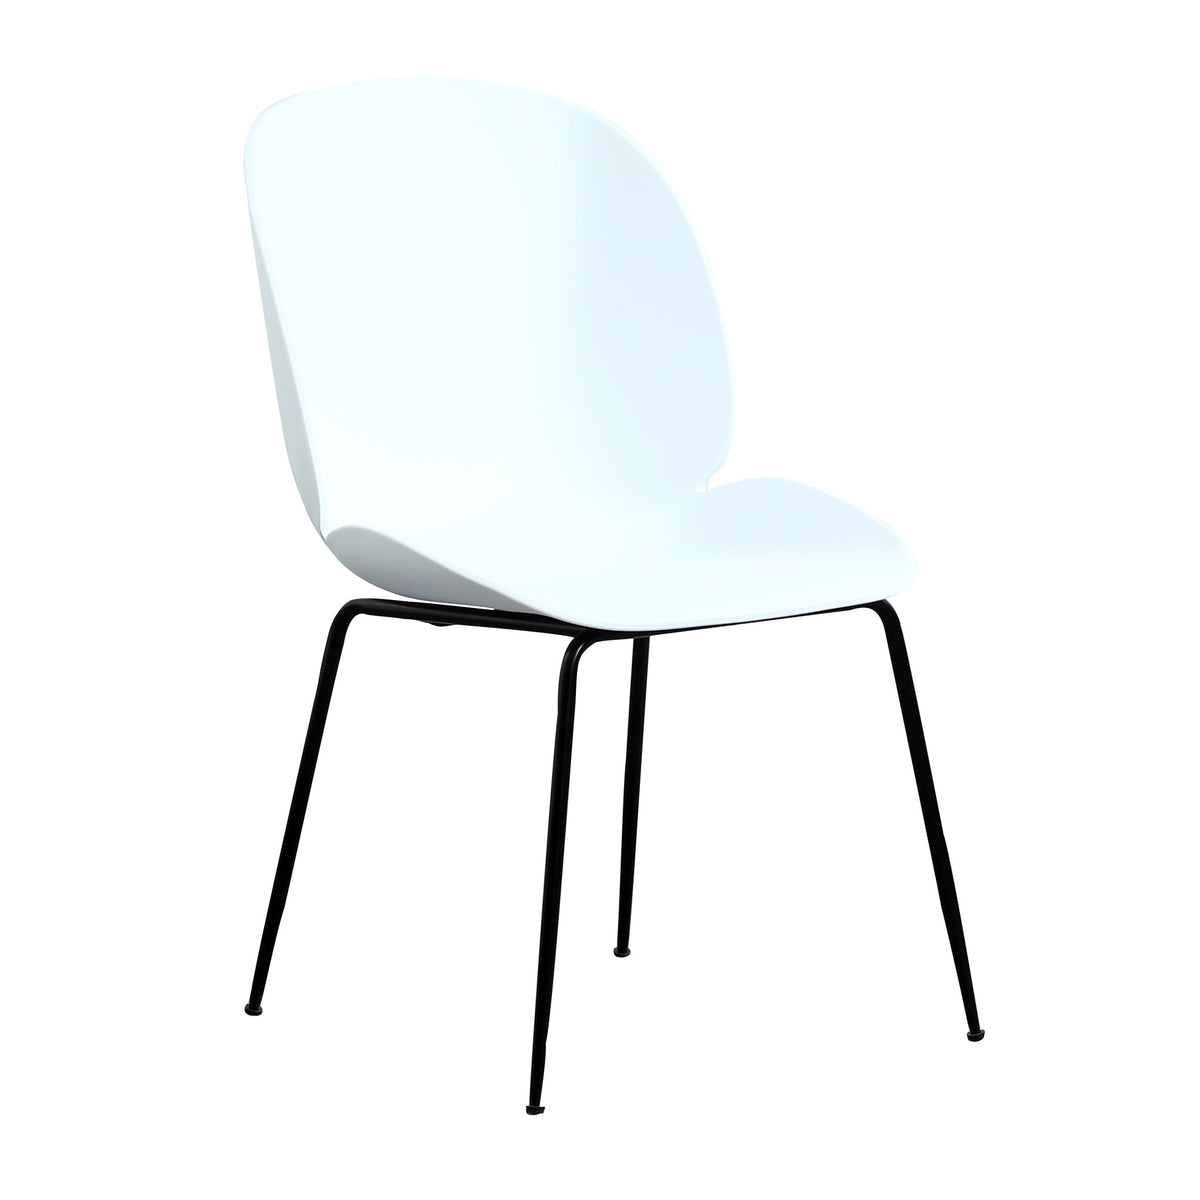 Katrina Whtie Contemporary Dining Chair from Roseland Furniture